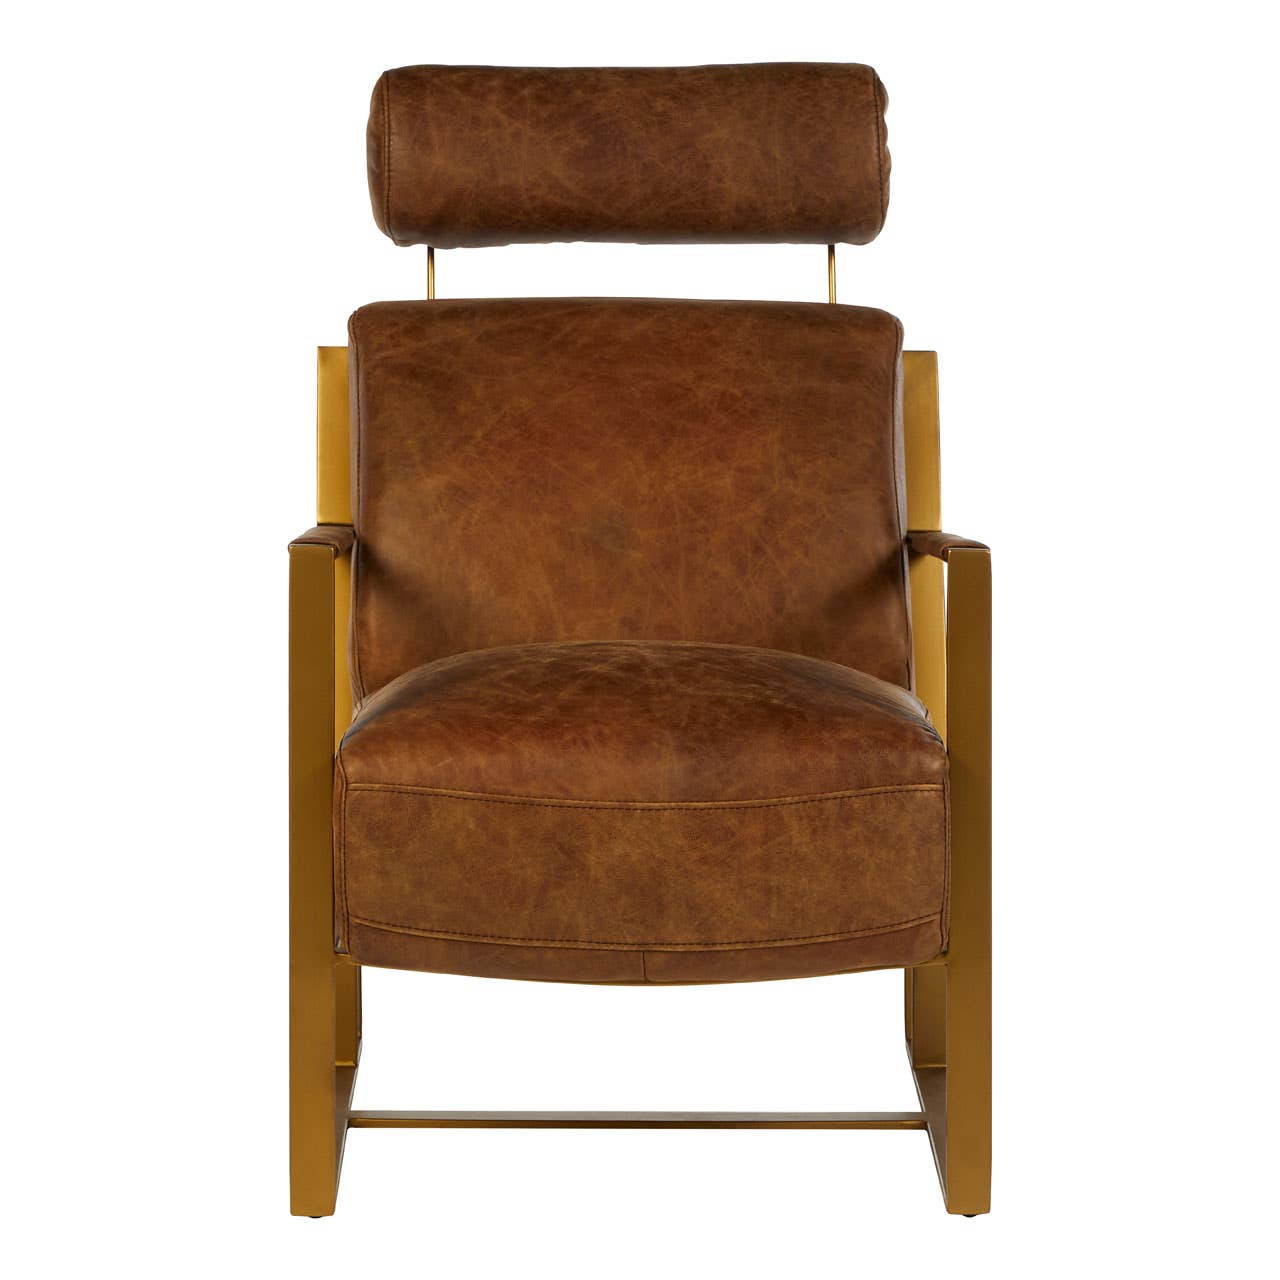 Hoxton Light Brown Leather Lounge Chair